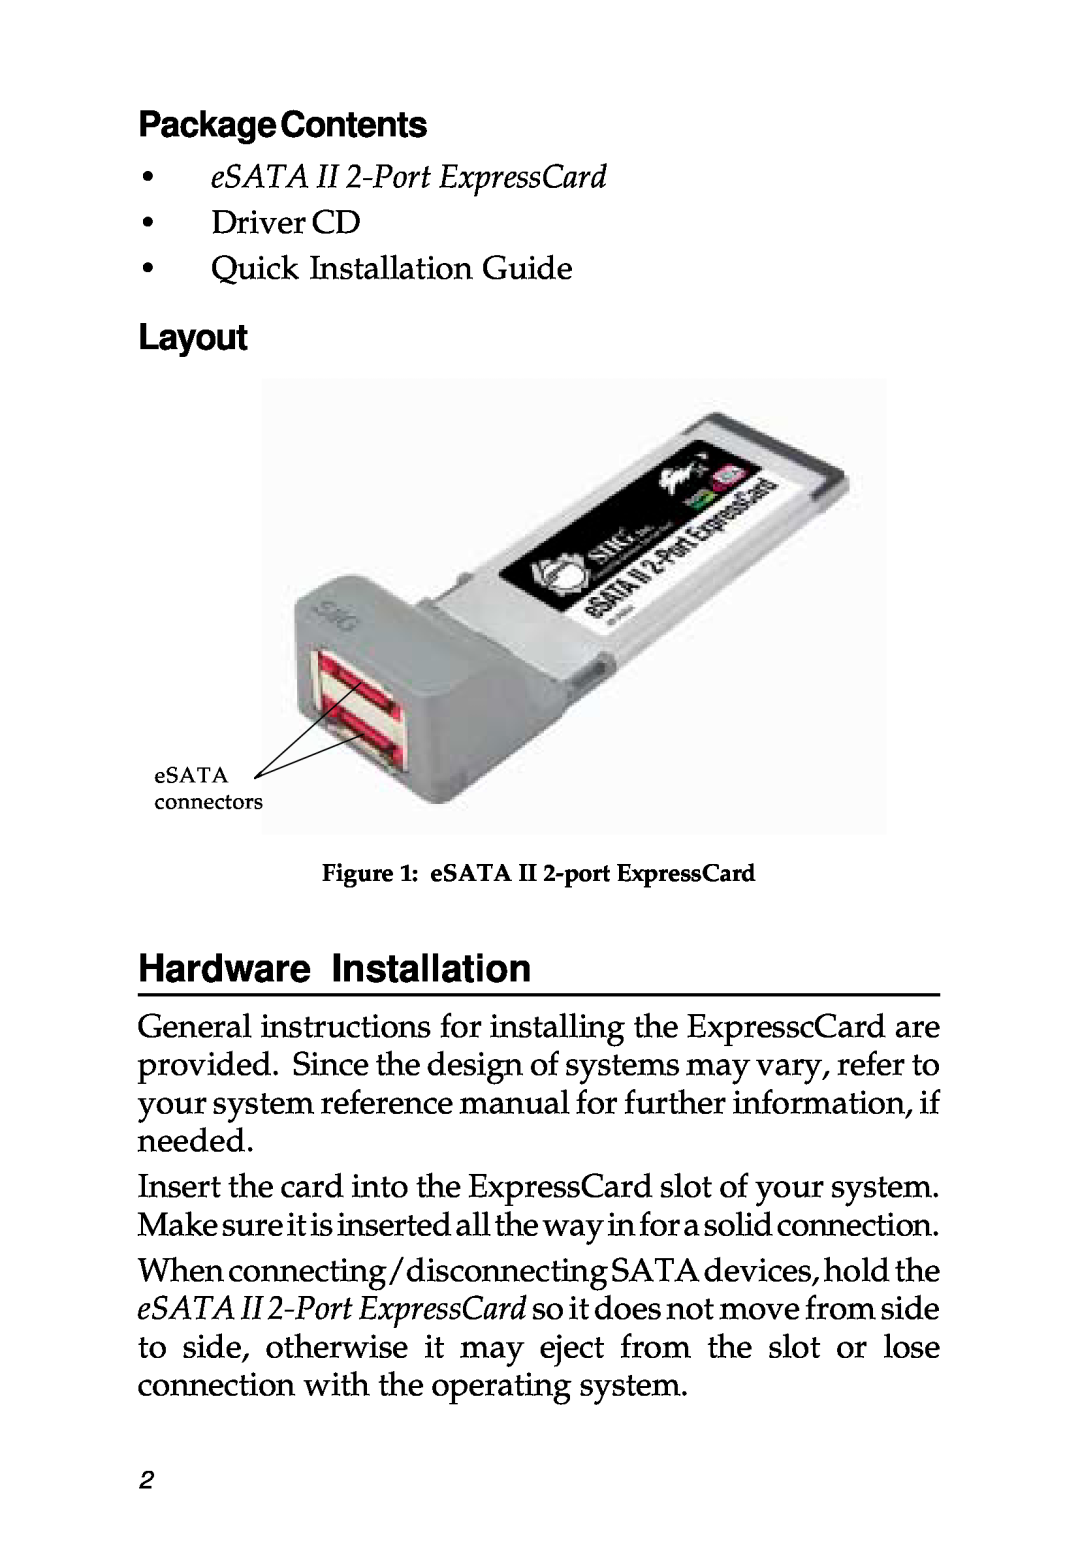 SIIG 104-0487A specifications Hardware Installation, Package Contents, Layout, eSATA II 2-Port ExpressCard 